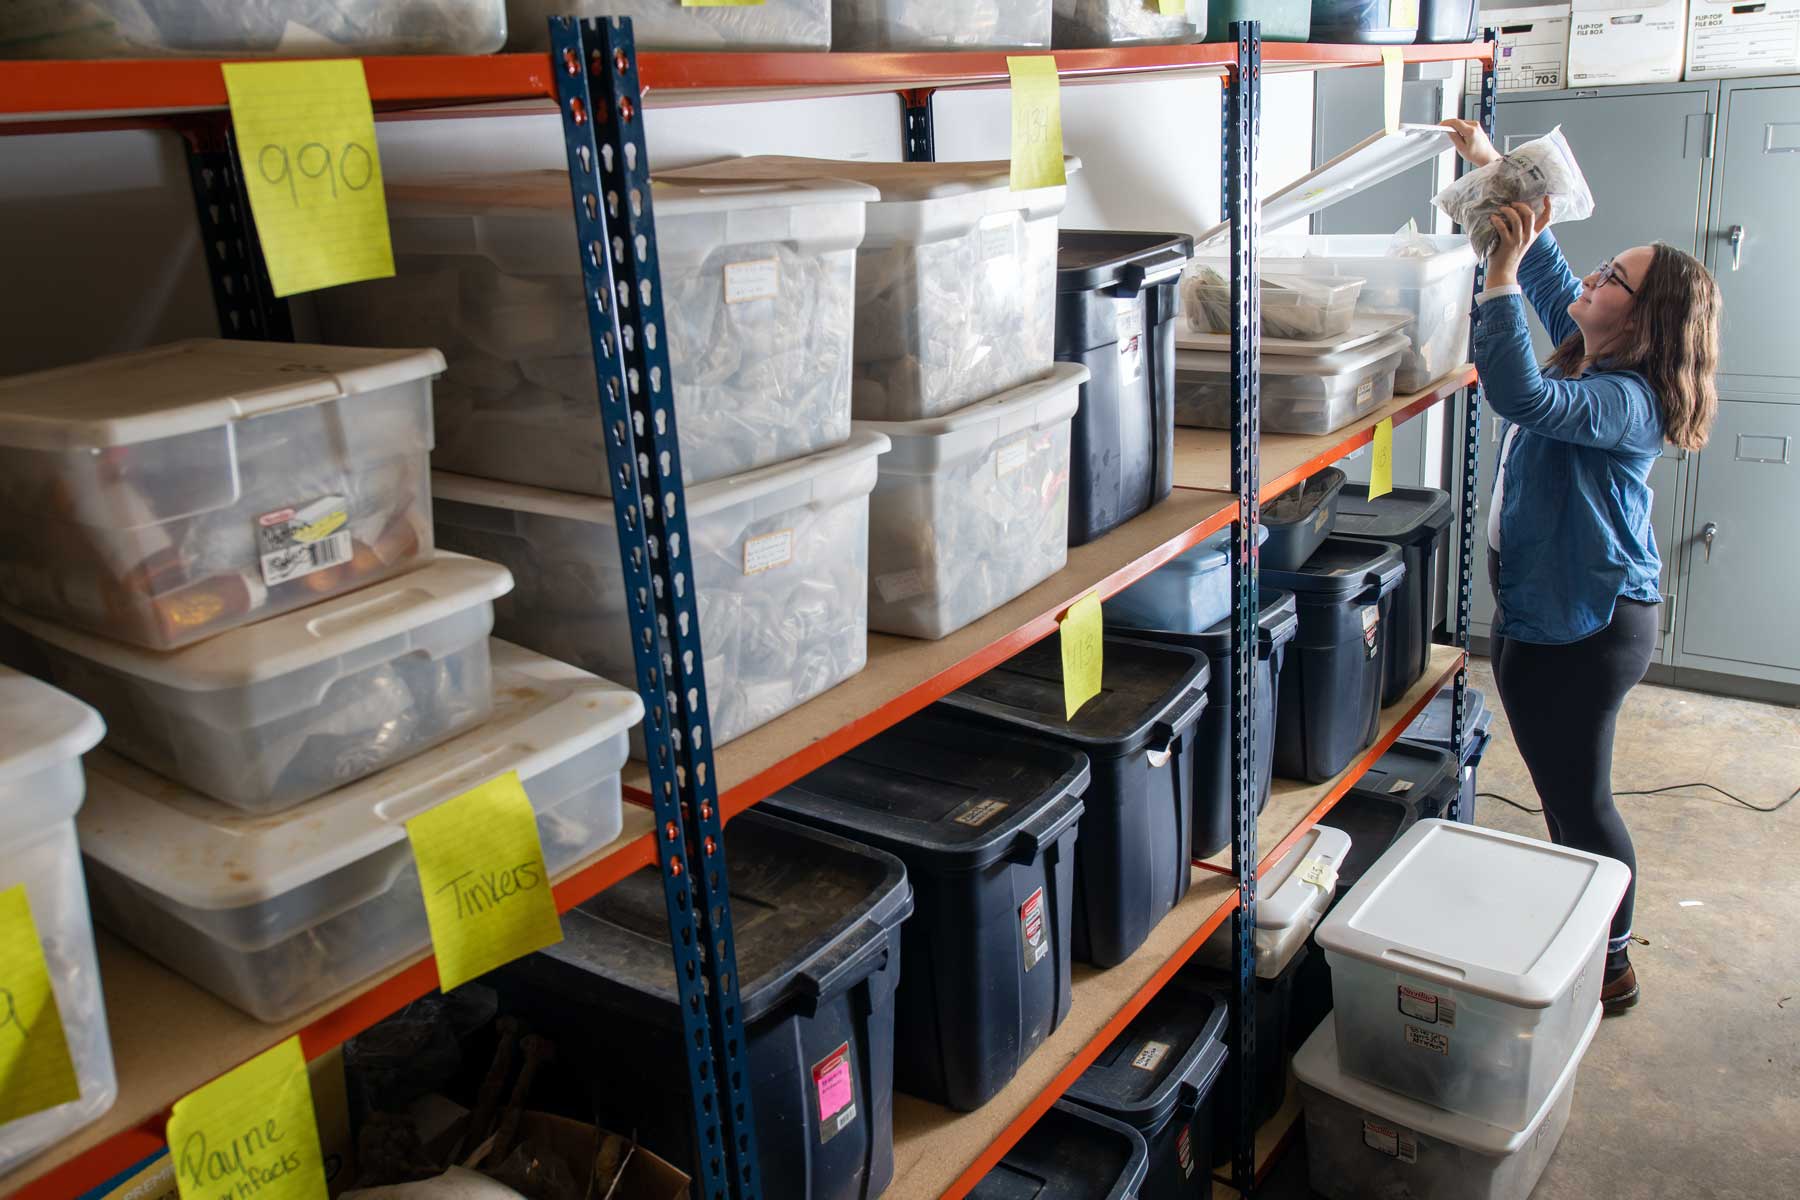 A student accesses stacks of boxes filled with categorized archaeological specimens